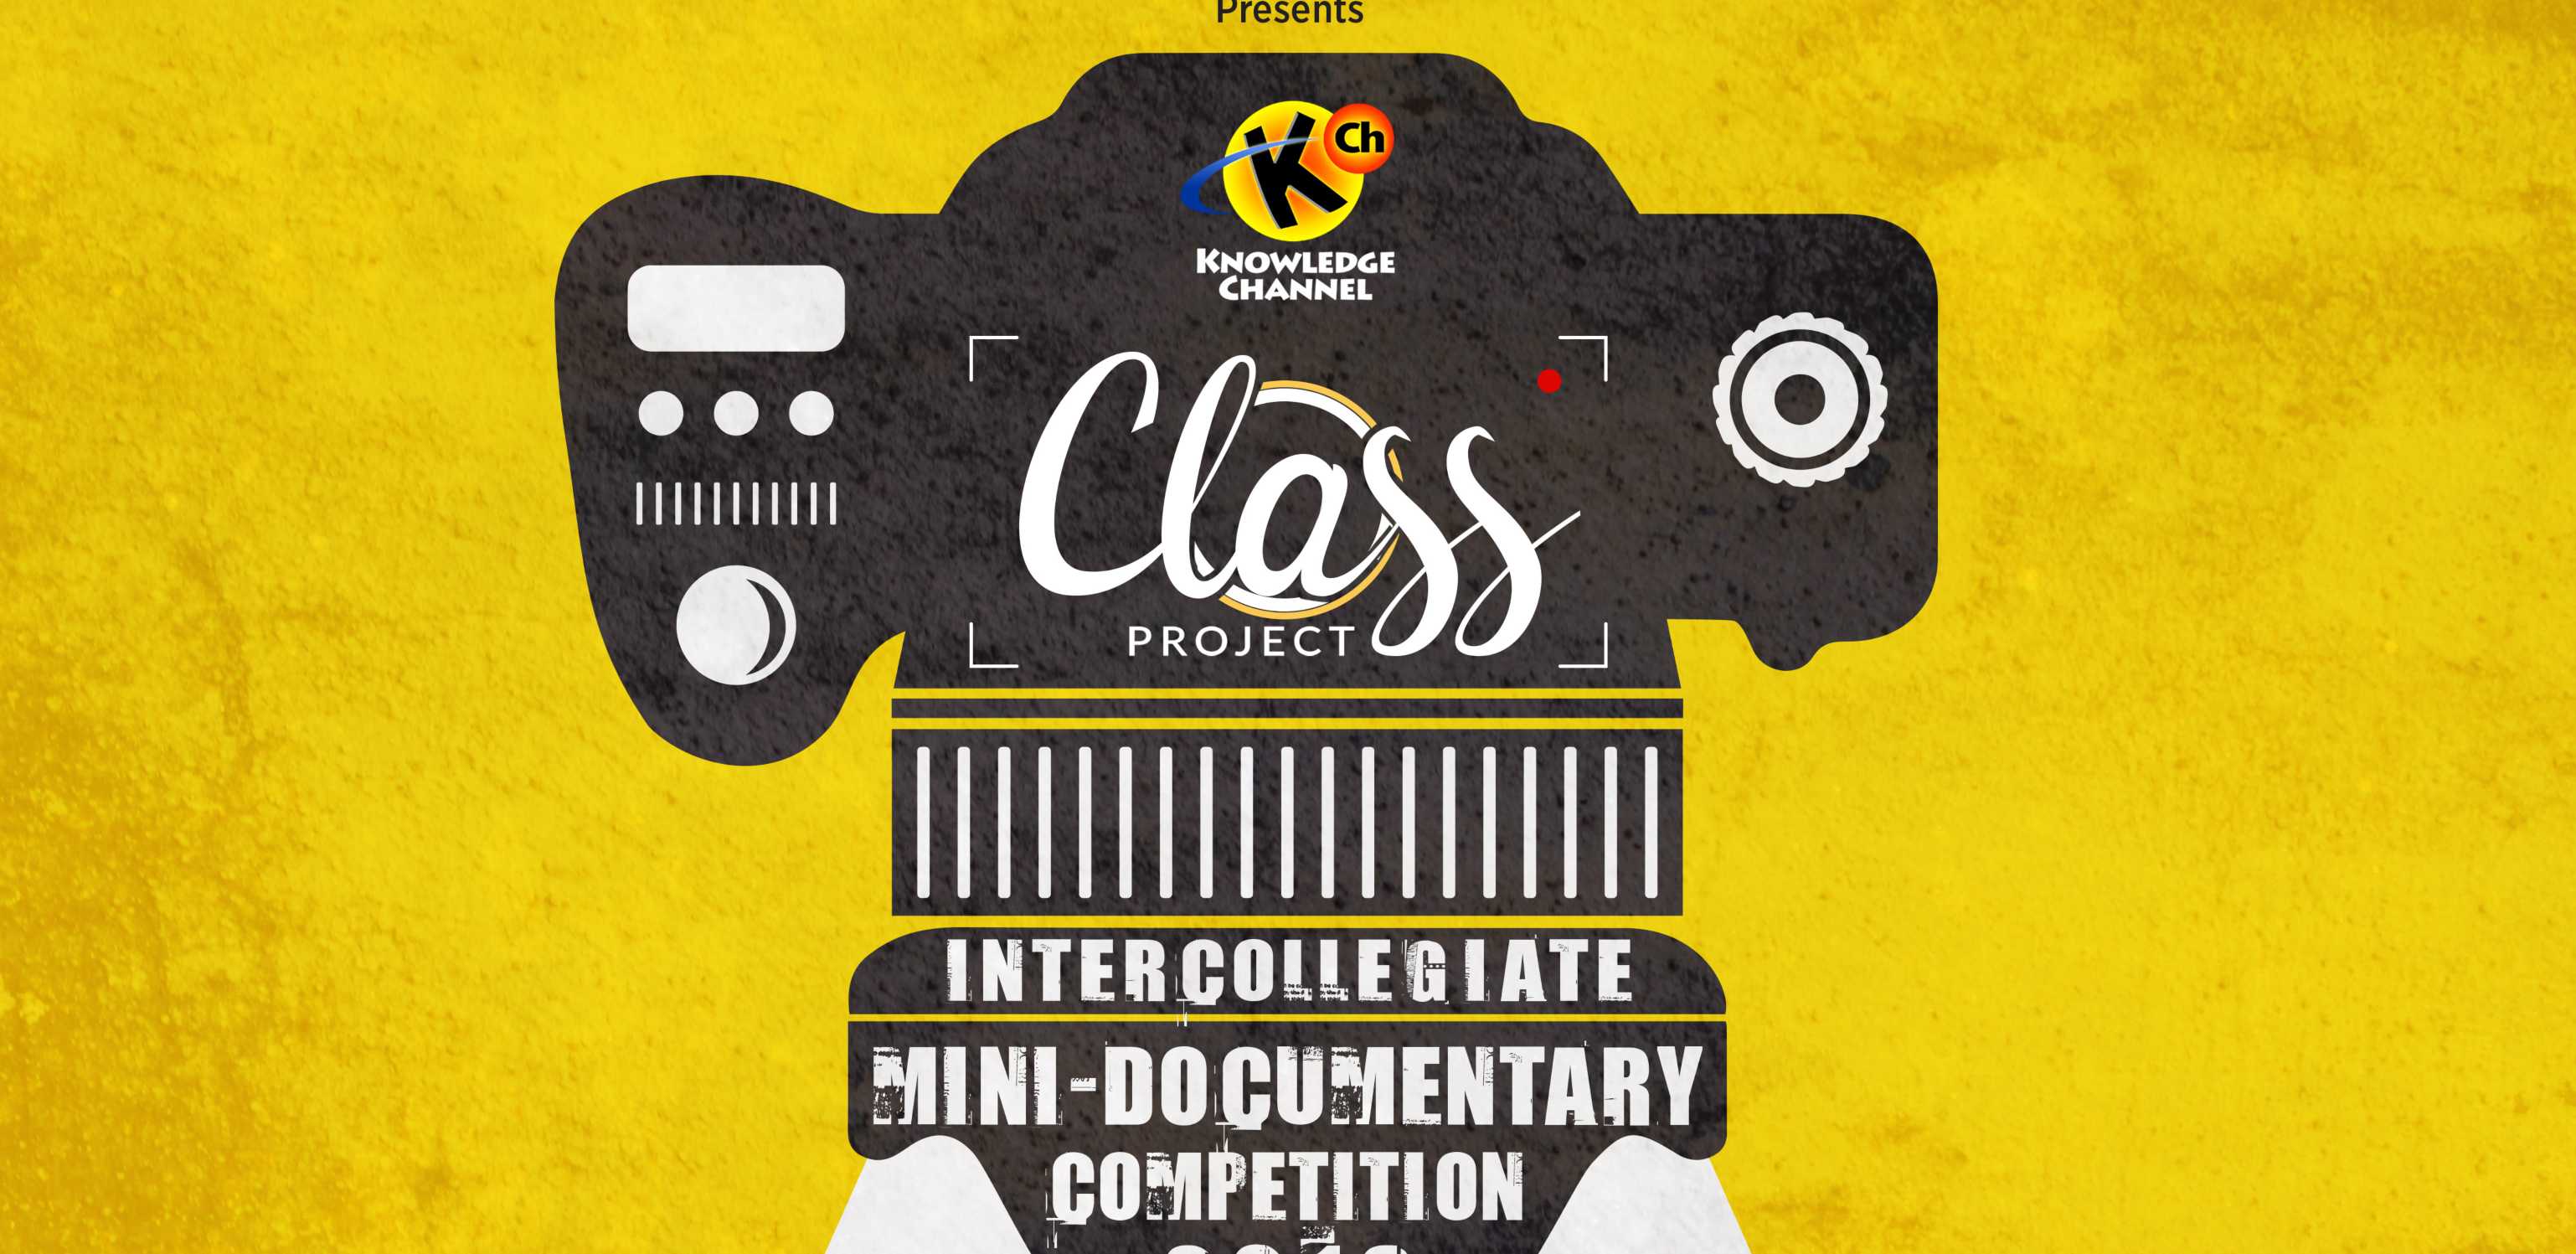 ABS-CBN and Knowledge Channel kick off 2nd year of “Class Project” documentary contest for students